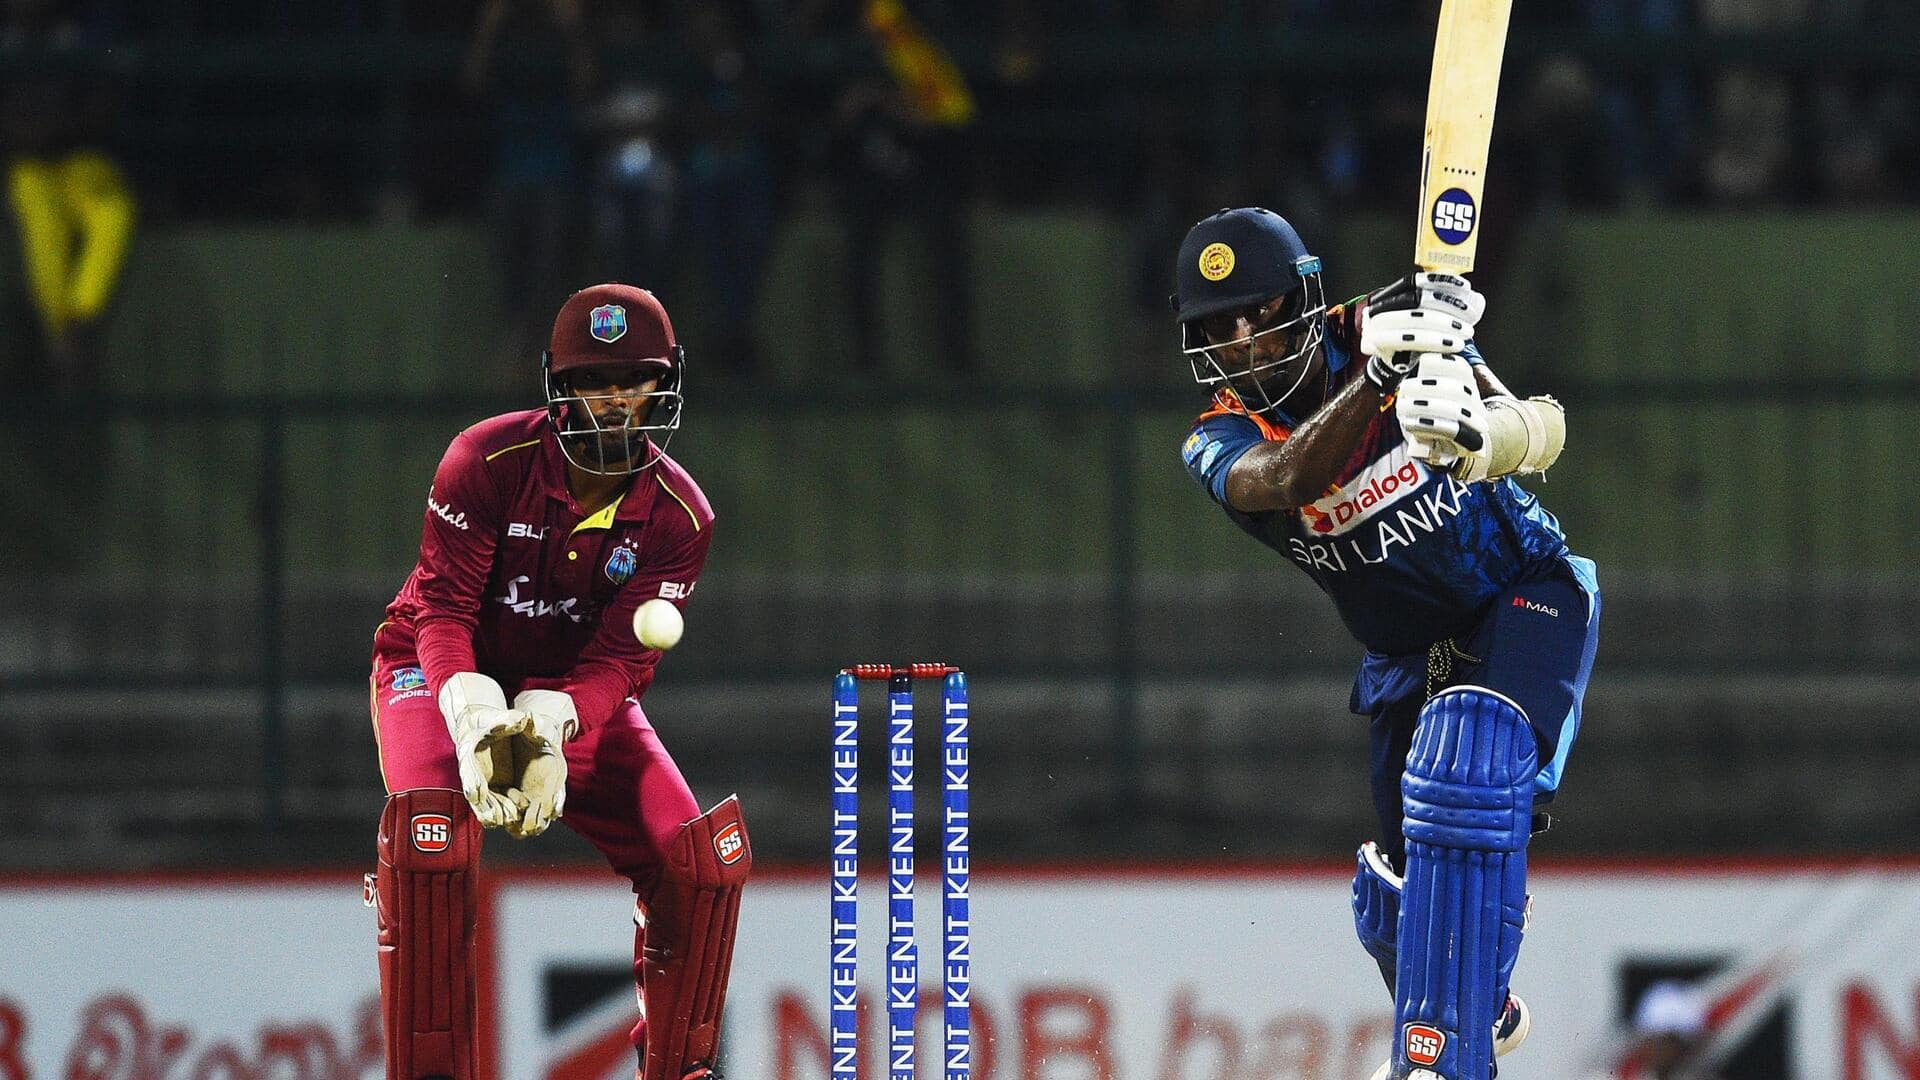 Angelo Mathews completes 200 appearances in T20 cricket: Stats